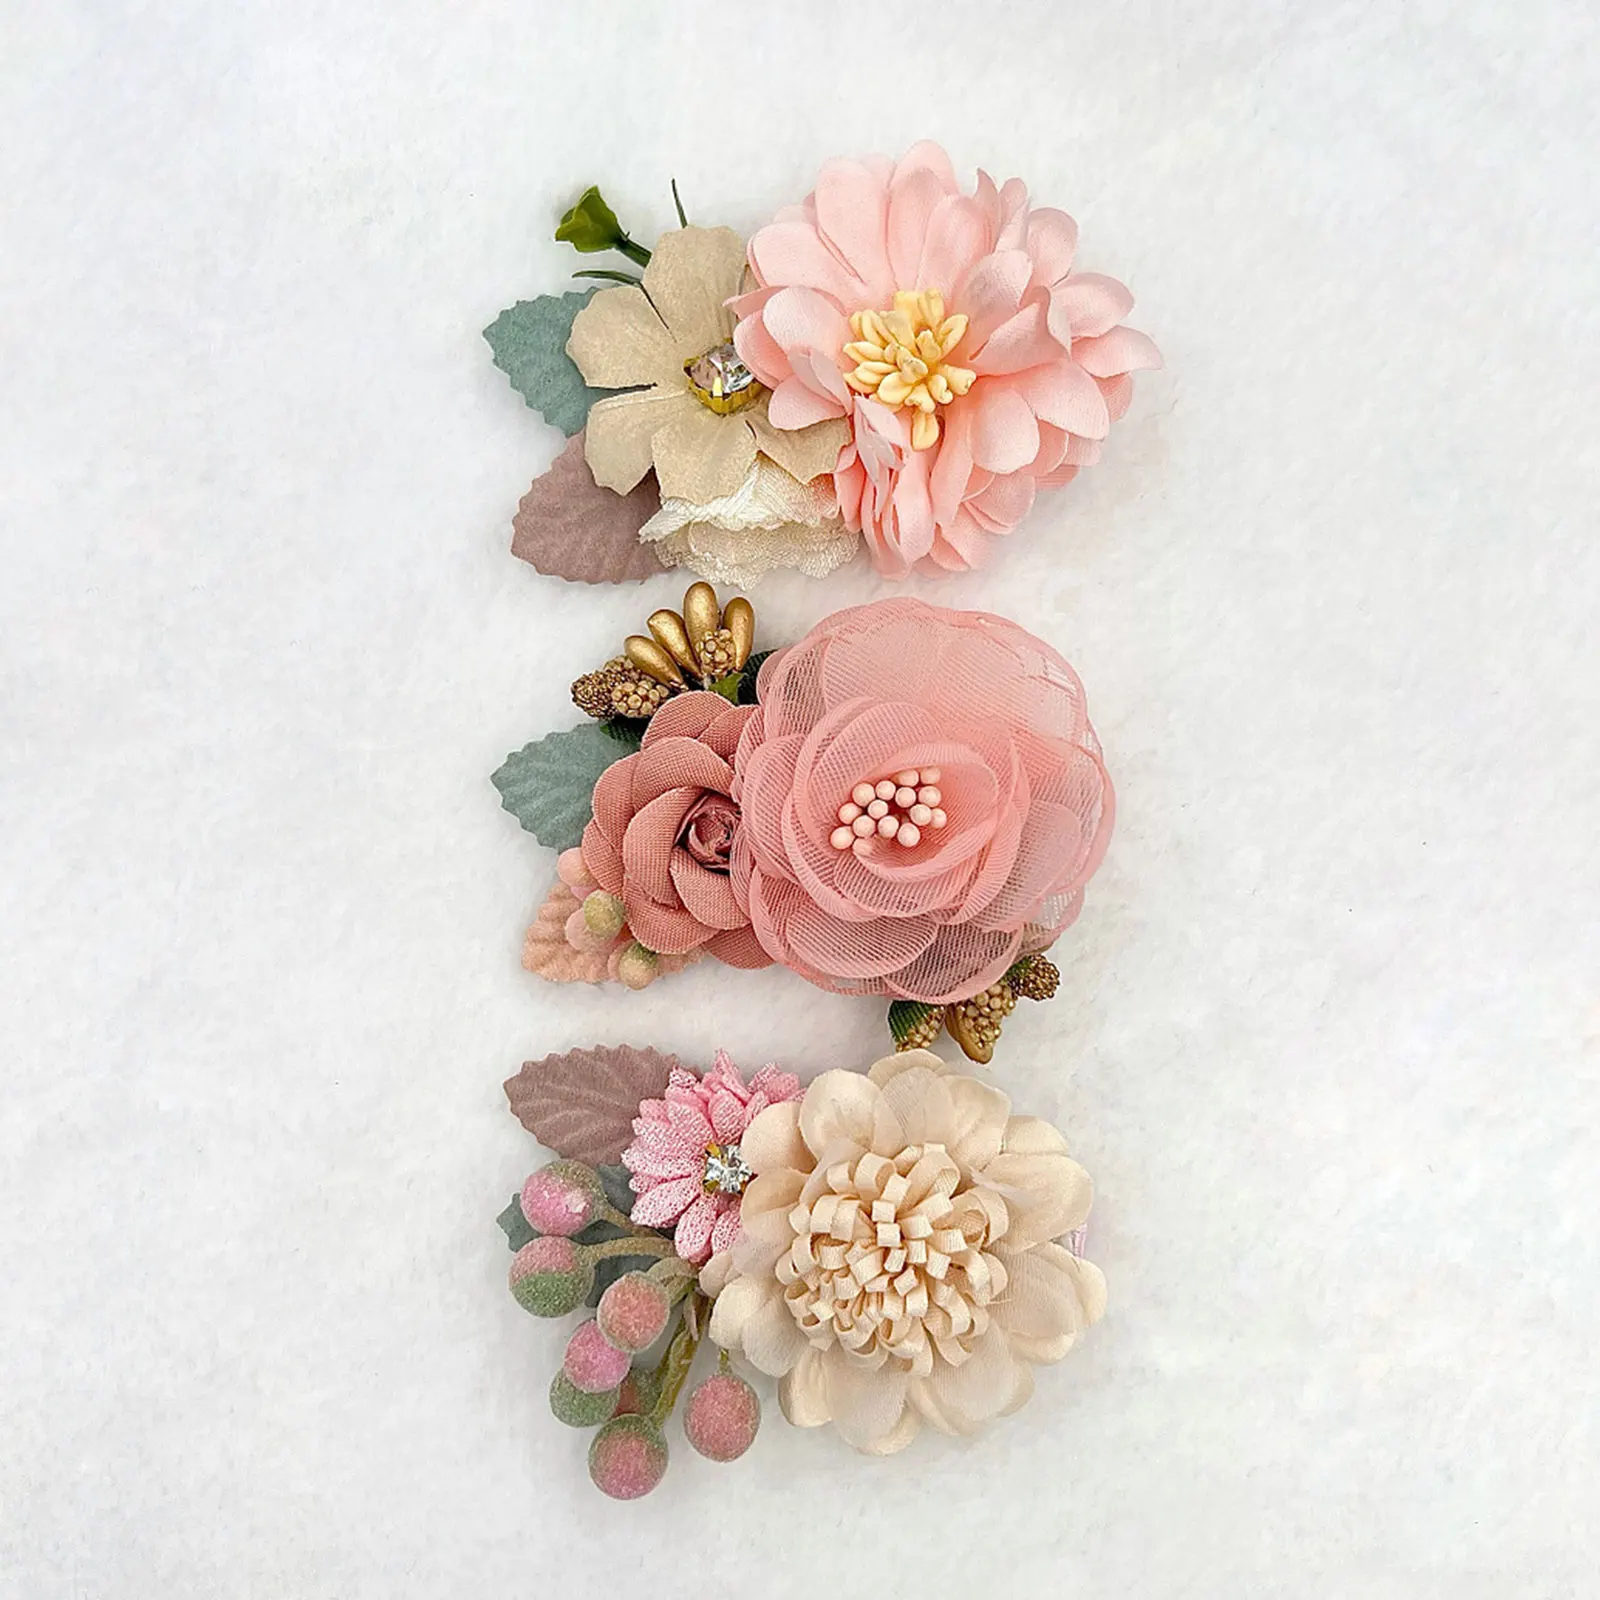 

Mildsown Multi Styles Baby Girls Flower Hair Clips Cute Rose Hairpins Barrettes Fully Lined Hair Accessories Princess Wear